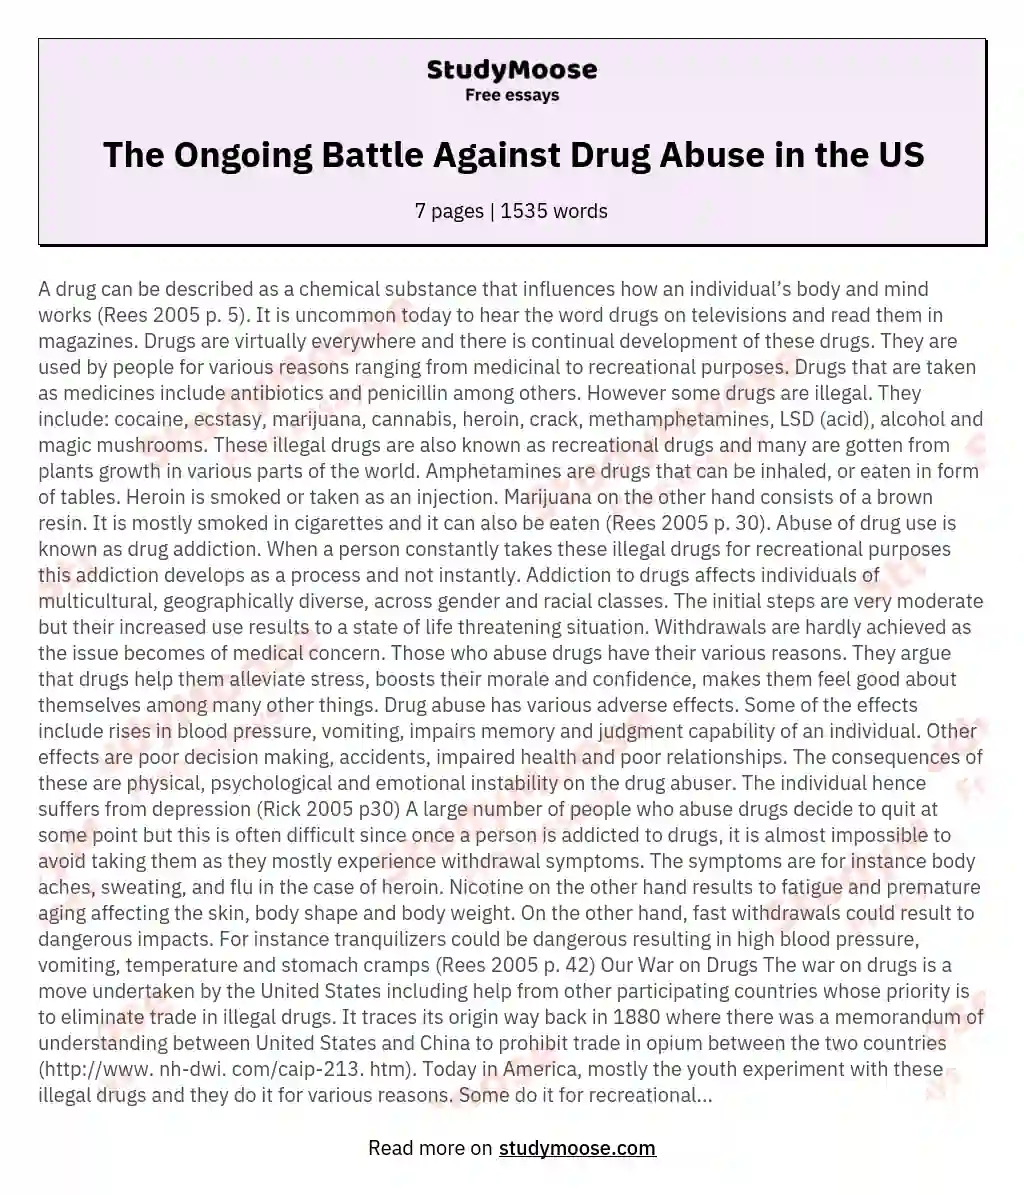 The Ongoing Battle Against Drug Abuse in the US essay